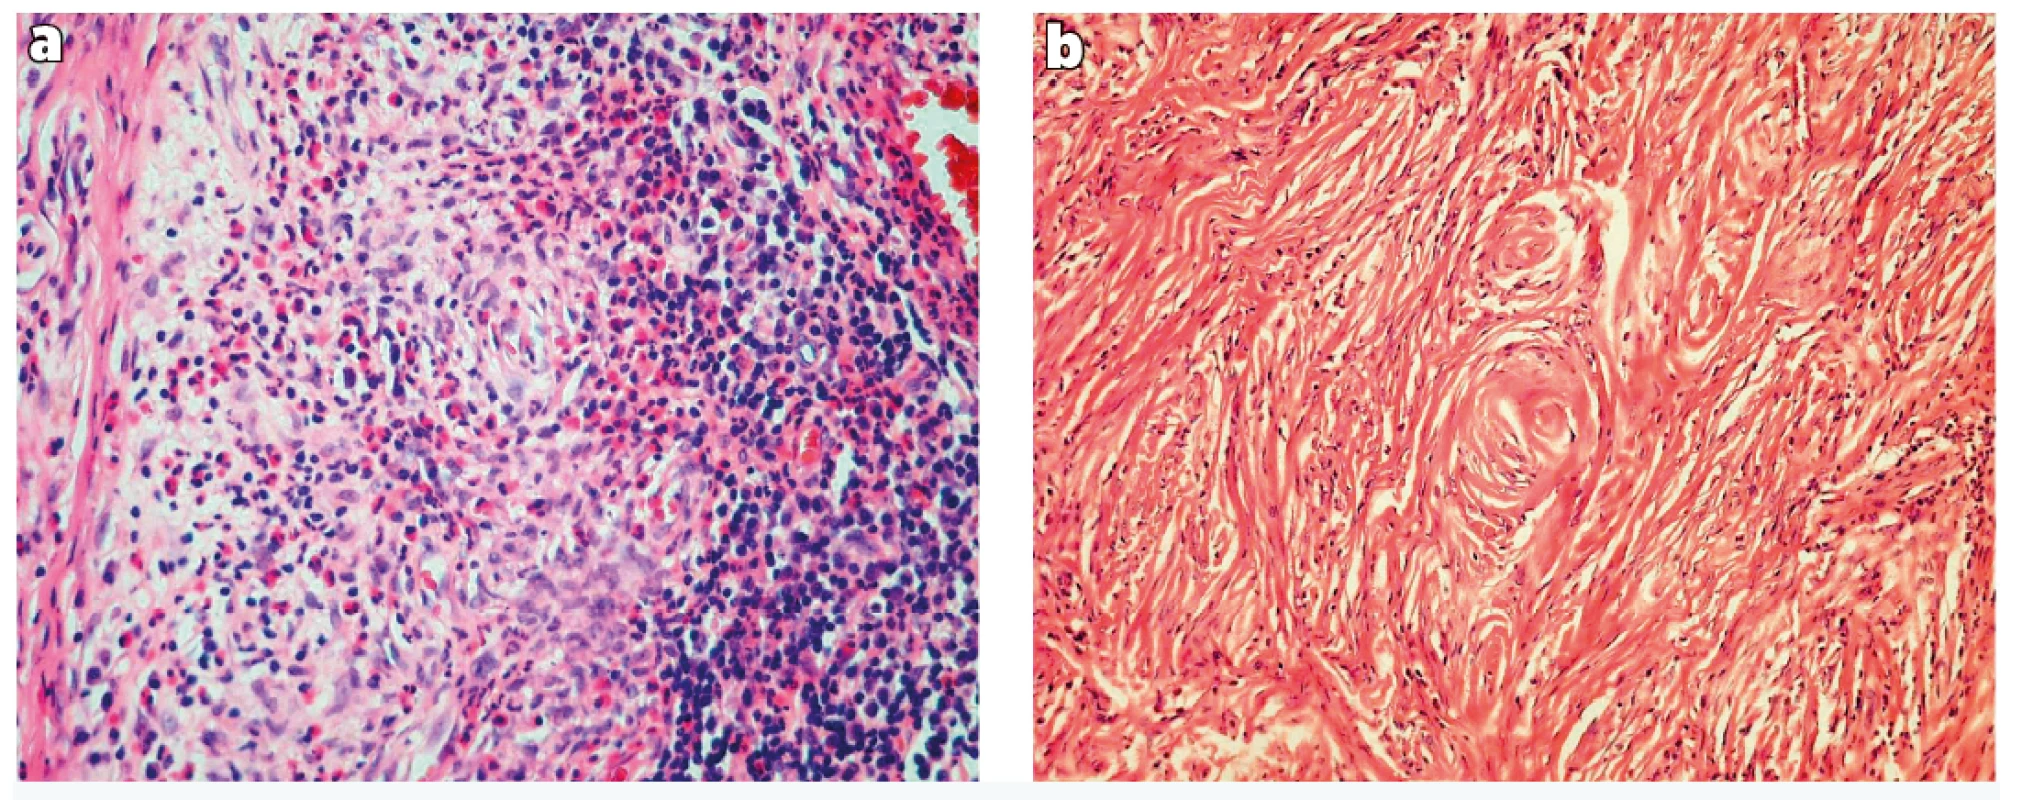 Histological findings.<br>
a) Dense fibrous connective tissue with chronic inflammatory cells and eosinophils surrounding small blood vessels (haematoxylin and
eosin, 200 x)<br>
b) Dense fibrotic stroma with concentric onion-skin perivascular fibrosis (haematoxylin and eosin, 100 x)